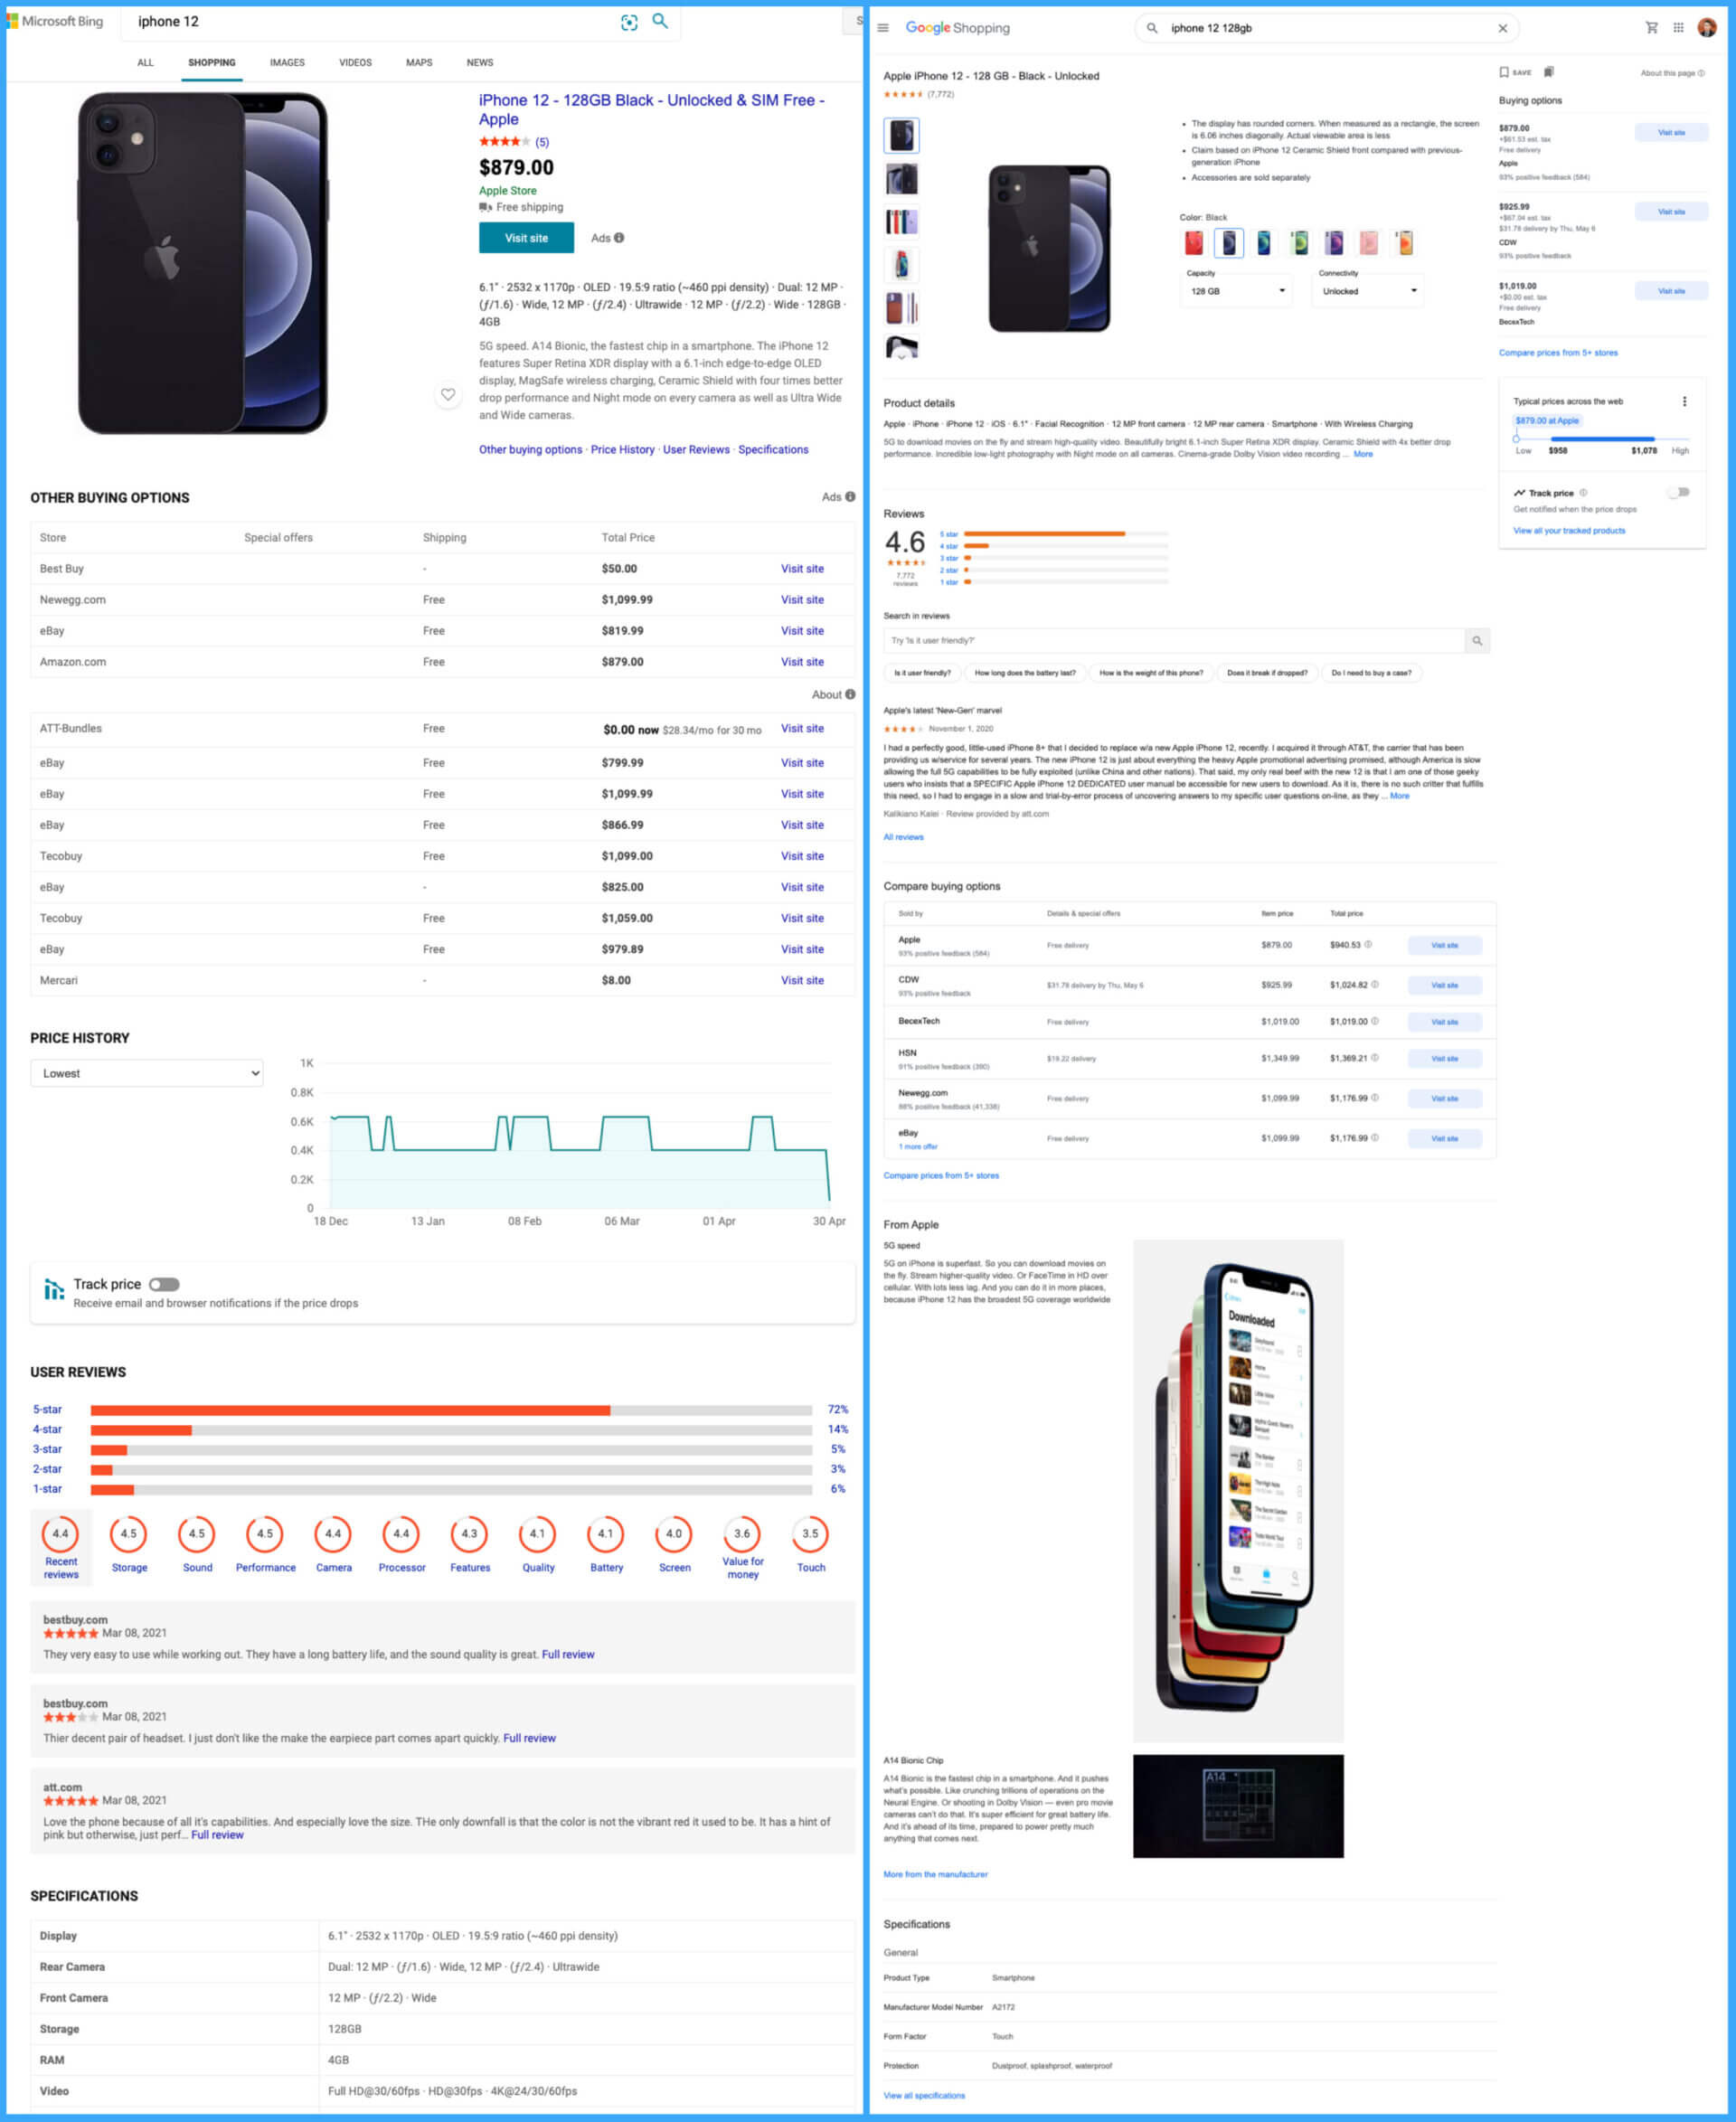 A Bing product detail page compared with a Google product detail page.